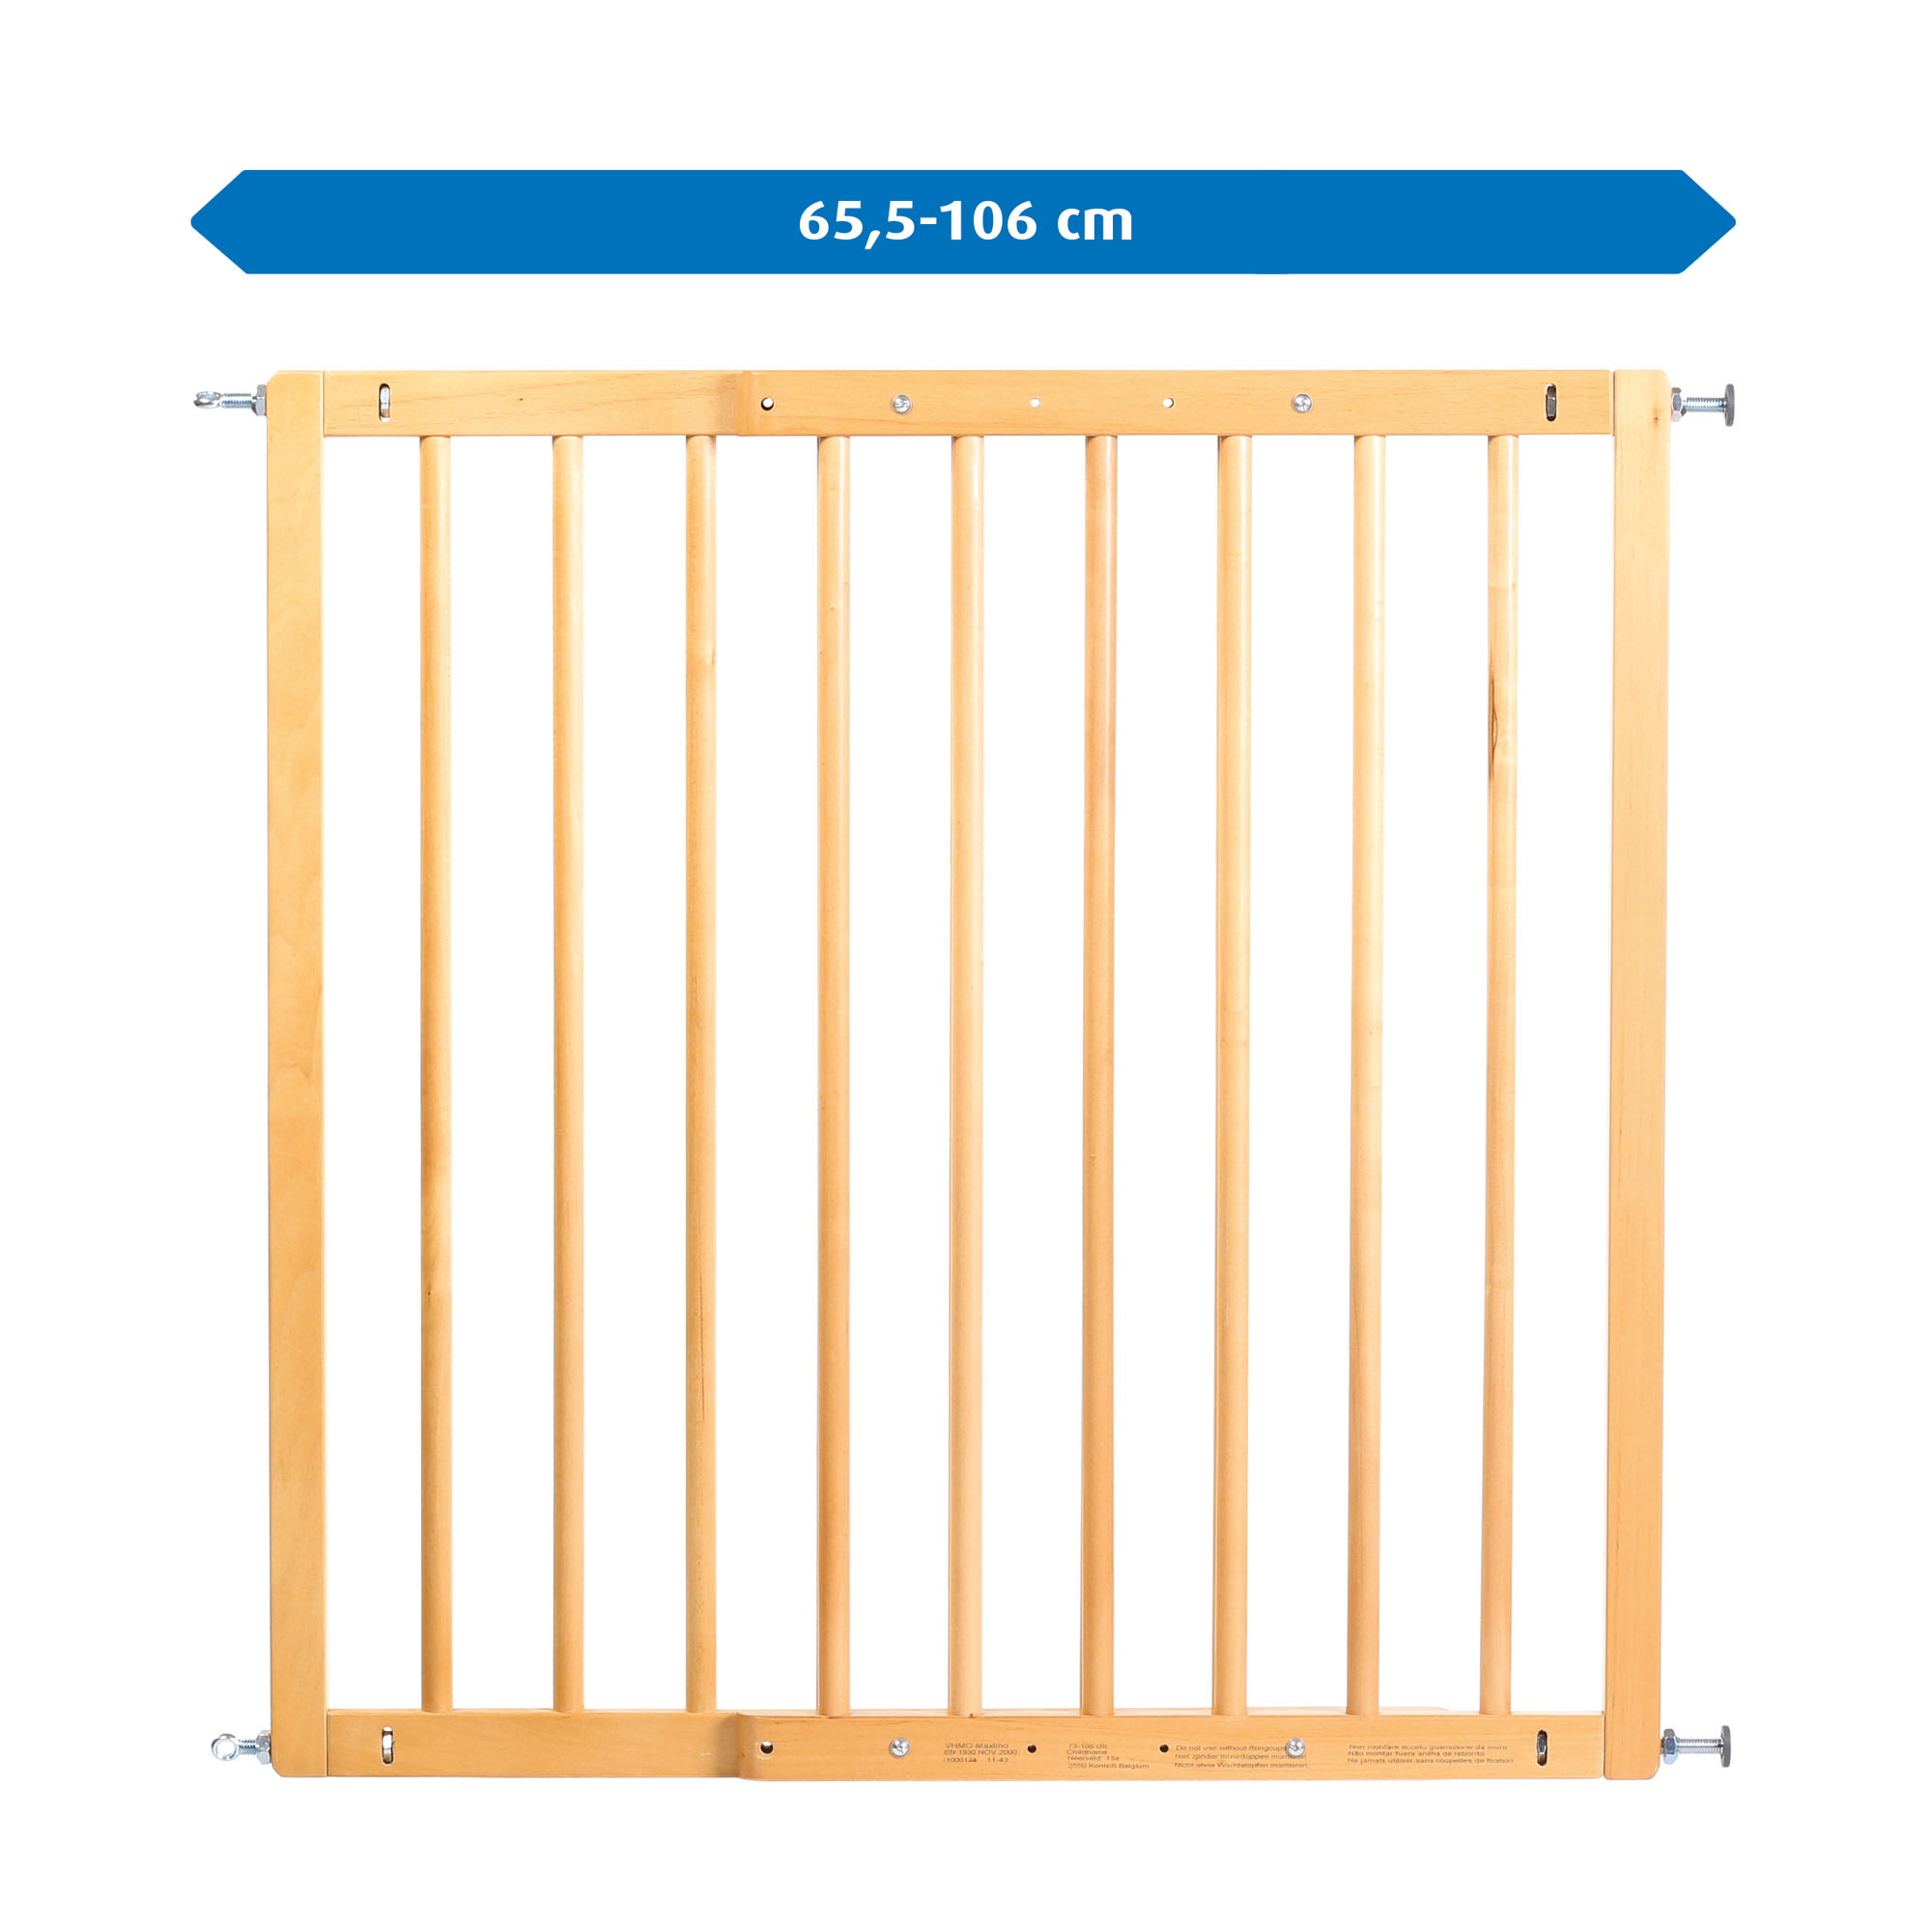 Basic Wall-mounted gate for gateway widths from 65.5 to 106 cm